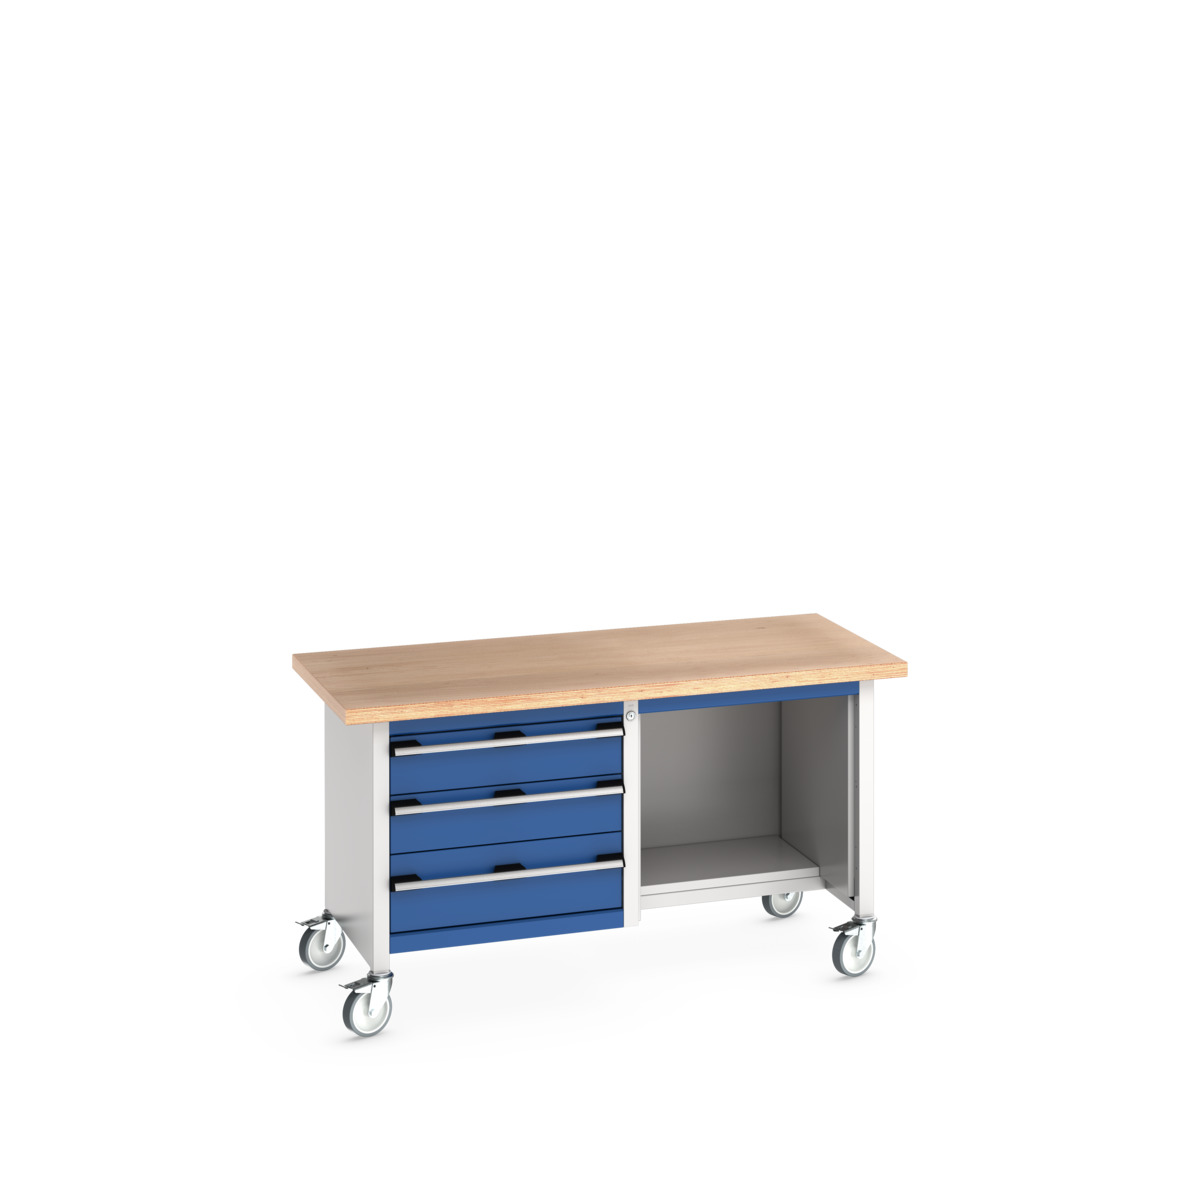 41002115.11V - cubio mobile storage bench (mpx)